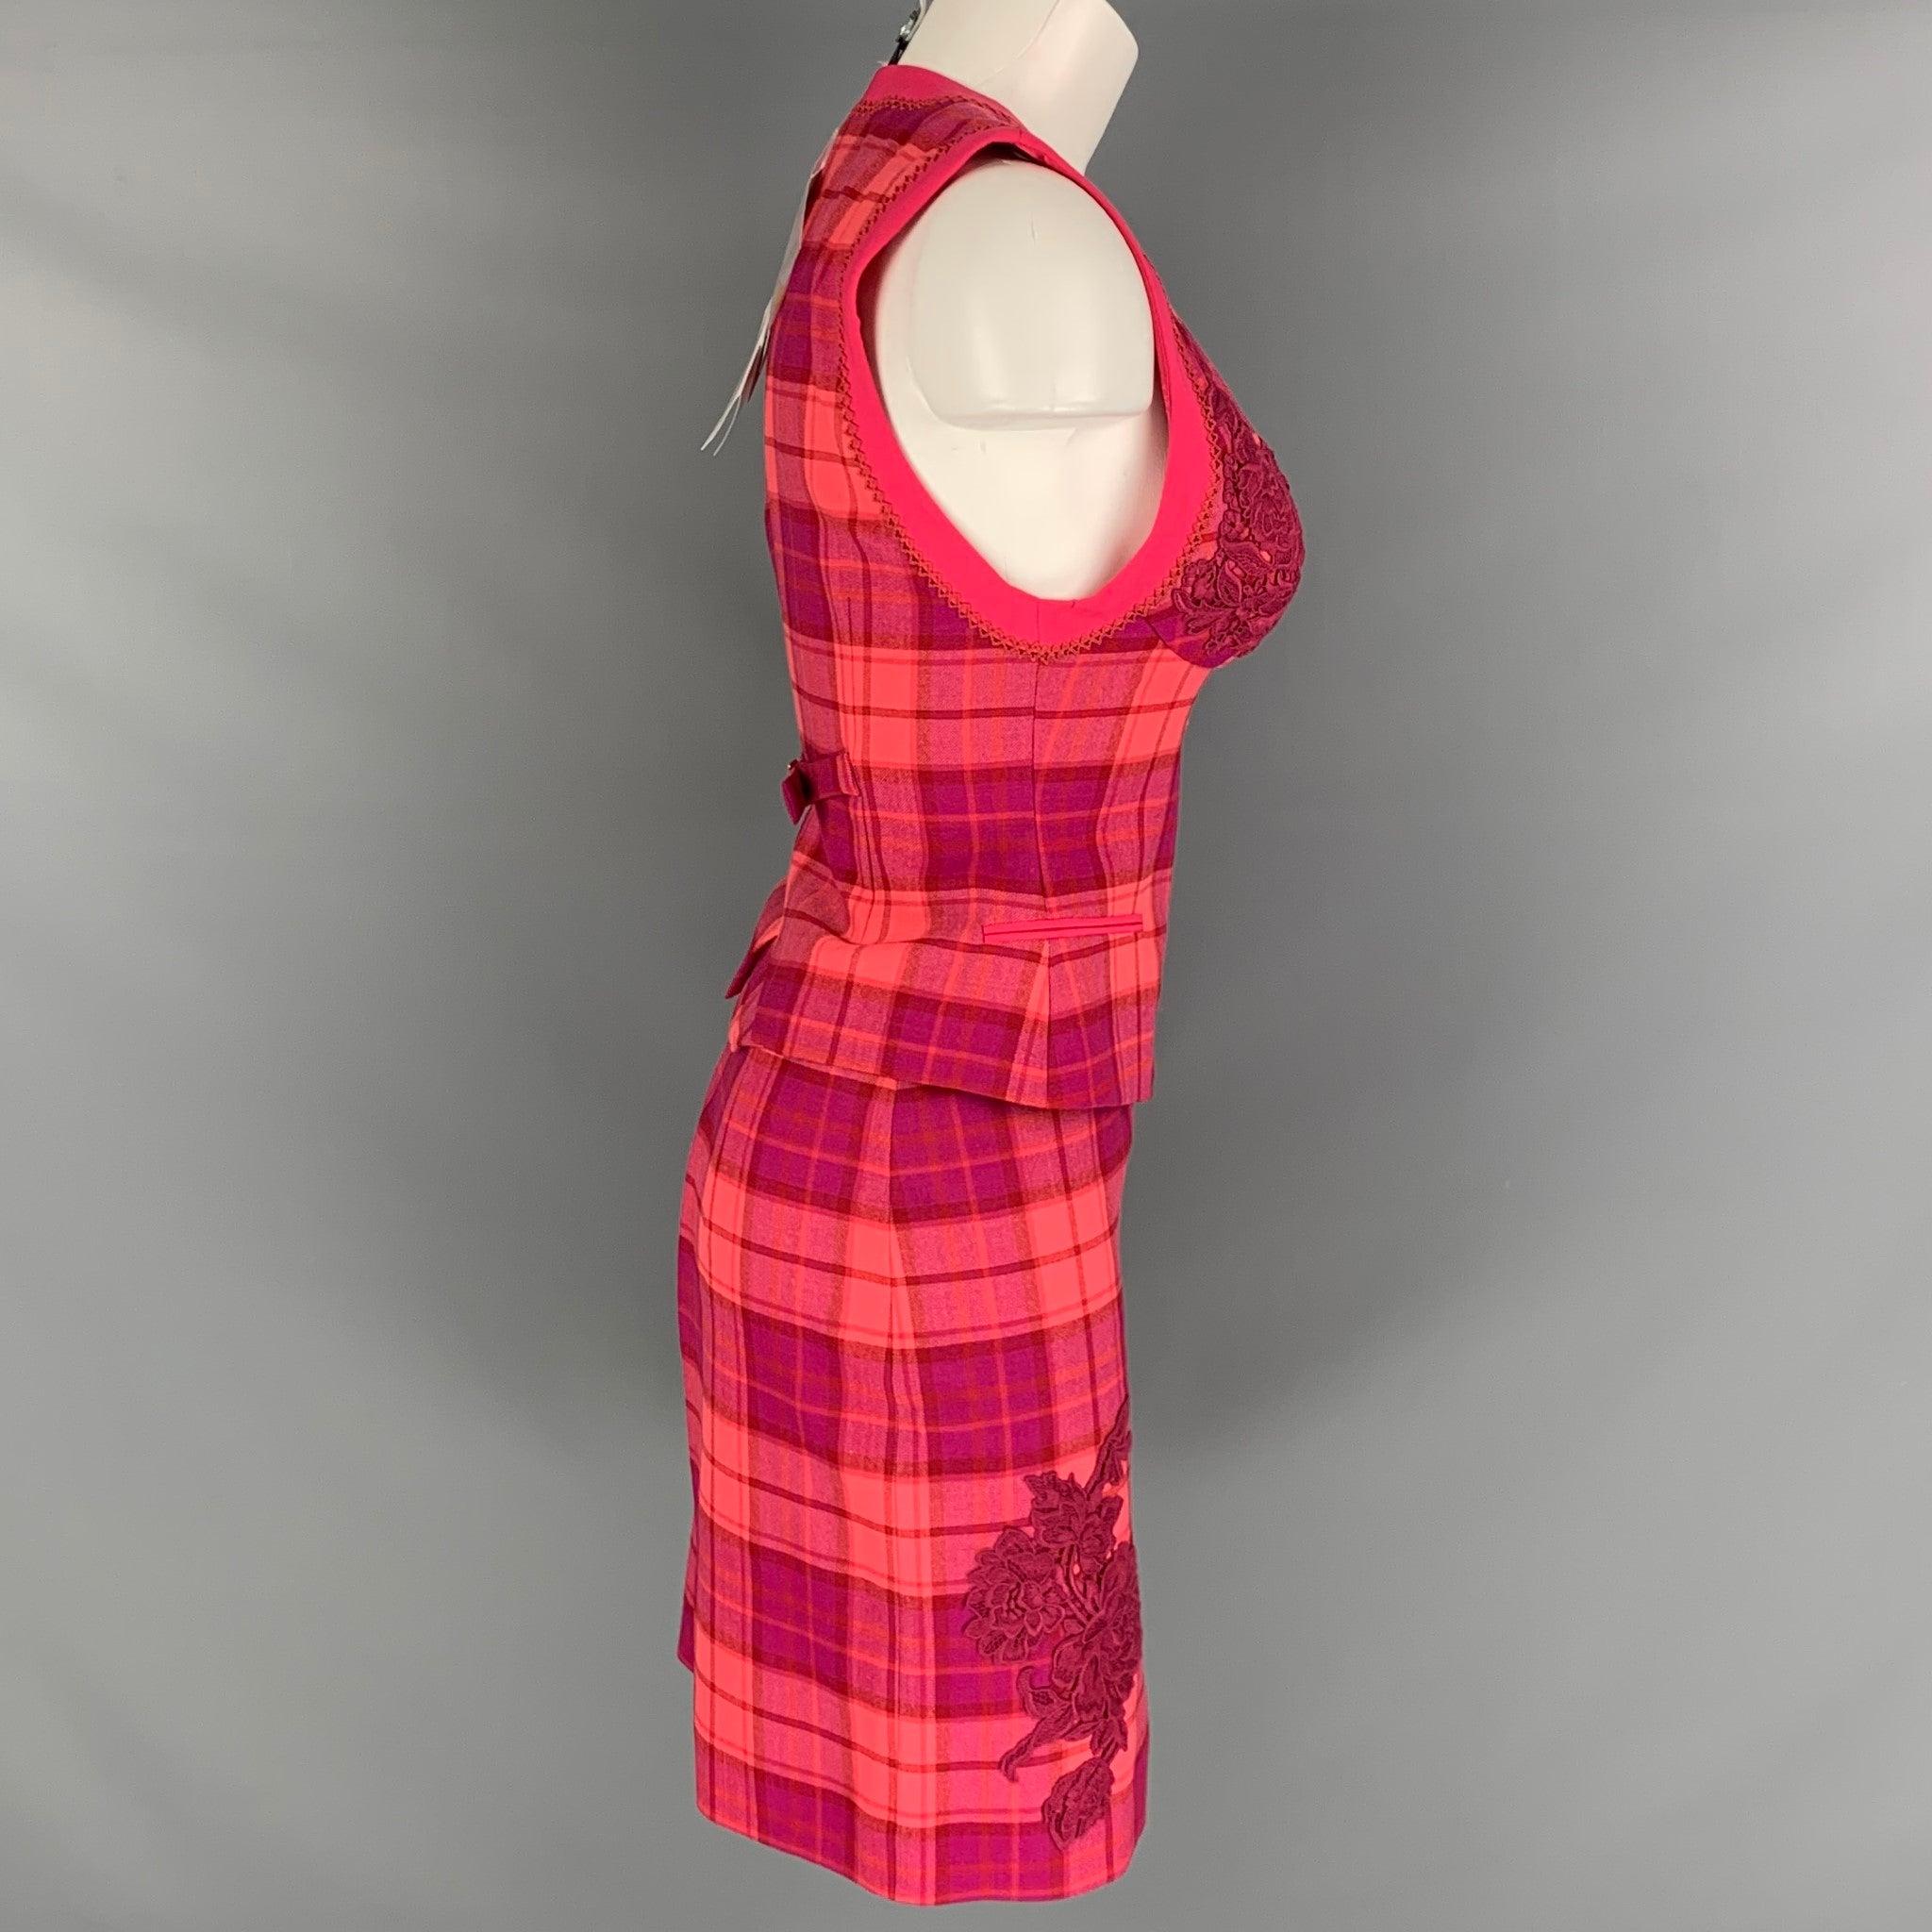 LA PERLA skirt set comes in pink and red plaid wool elastane woven material featuring a V-neck, single breasted vest with macrame details, appliques detail on bust, novelty buttons, and a matching above knee pencil skirt. New with Tags. 

Marked:  